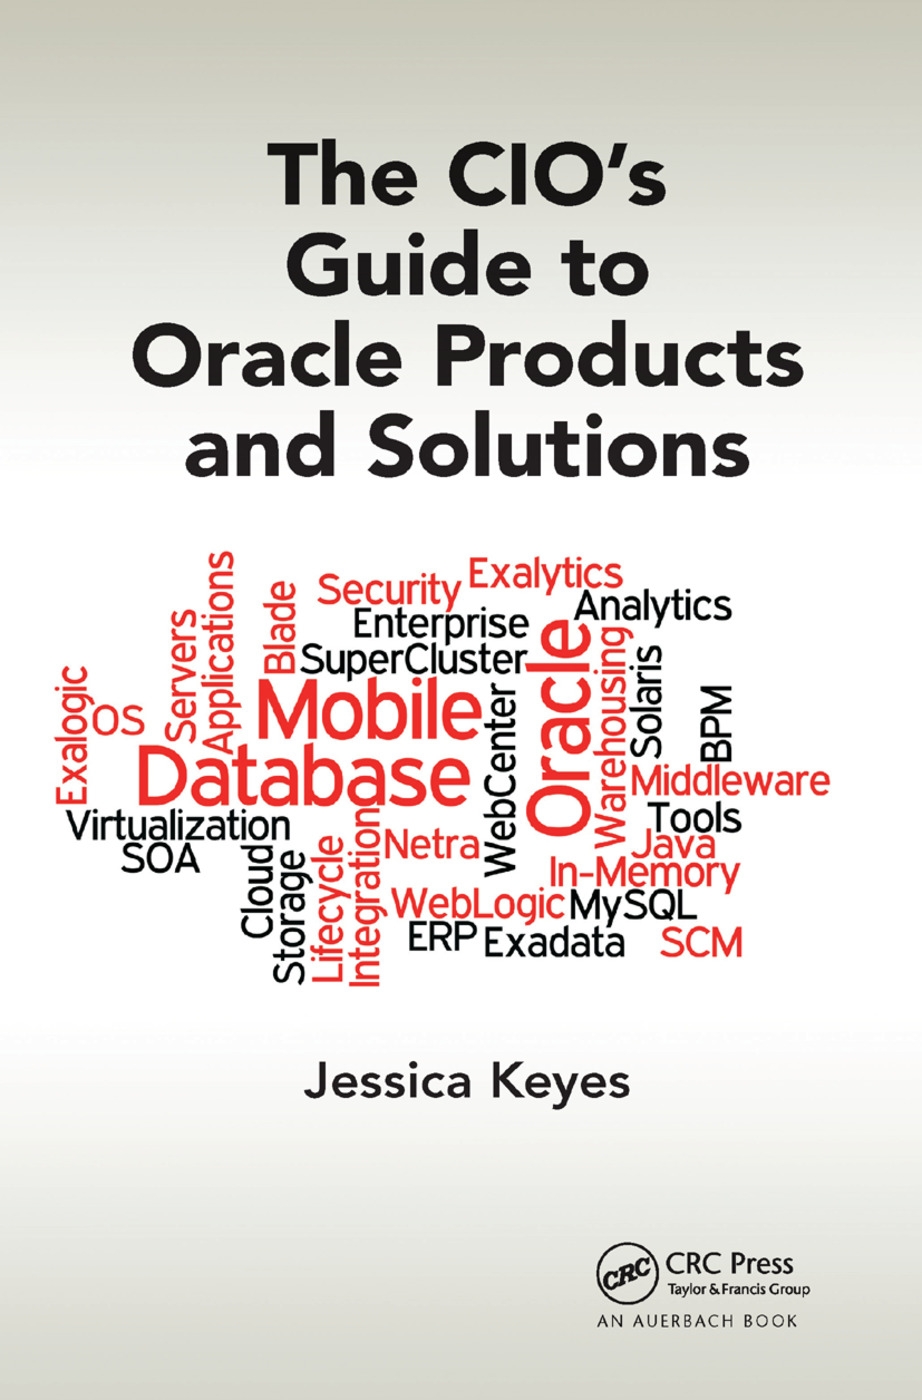 The Cio’’s Guide to Oracle Products and Solutions